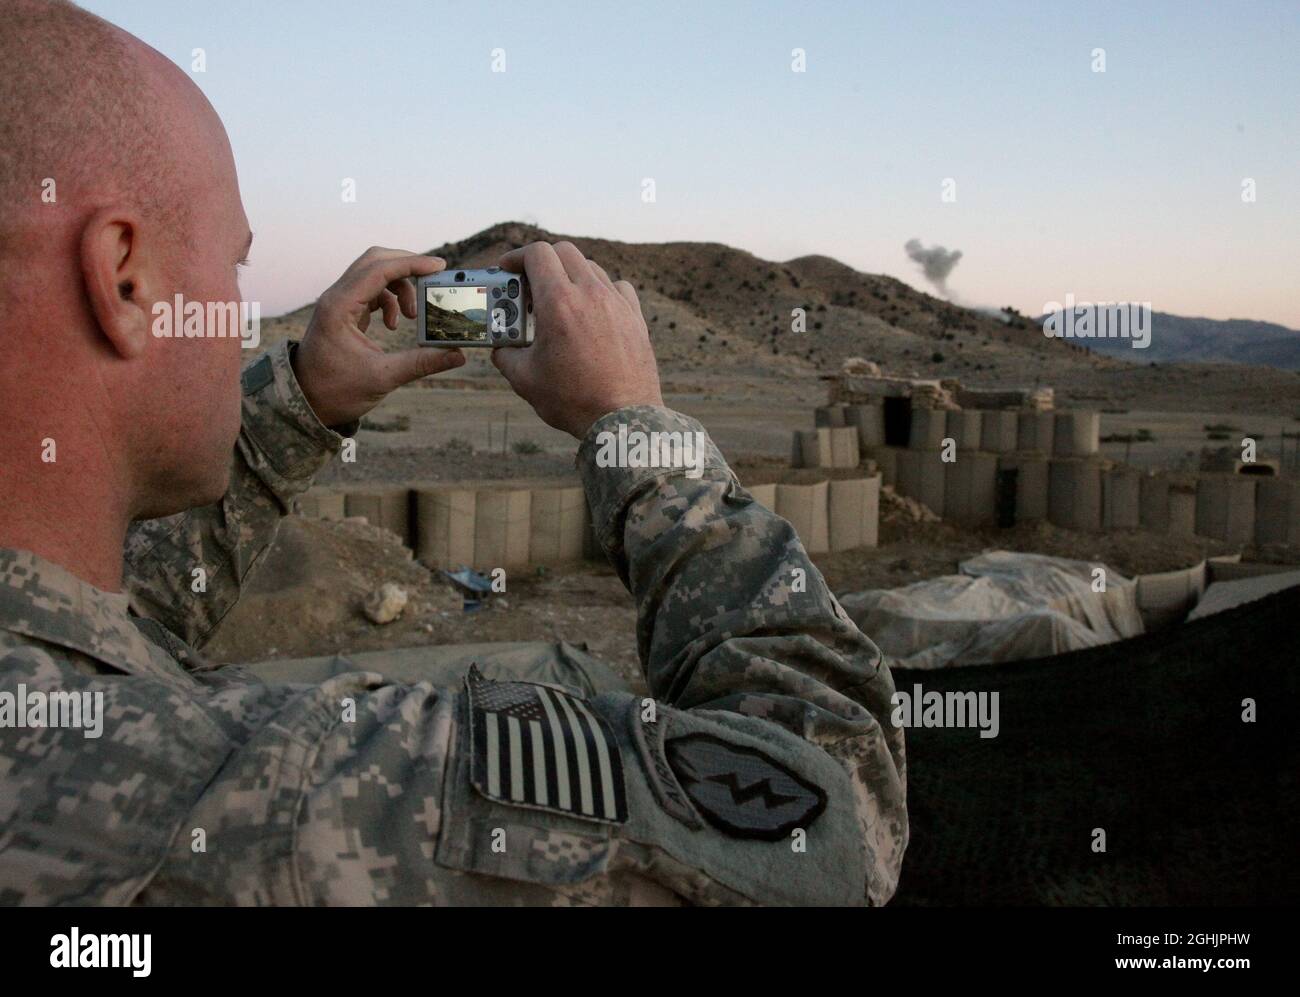 U.S. Army Staff Sgt. Jason Loomis, from Los Angeles, Calif., photographs 155 mm artillery rounds impacting on a nearby hillside at Combat Outpost Cherkatah, Khowst province, Afghanistan, Nov. 26, 2009. The artillery was fired by U.S. forces from Forward Operating Base Salerno during a test fire. Stock Photo